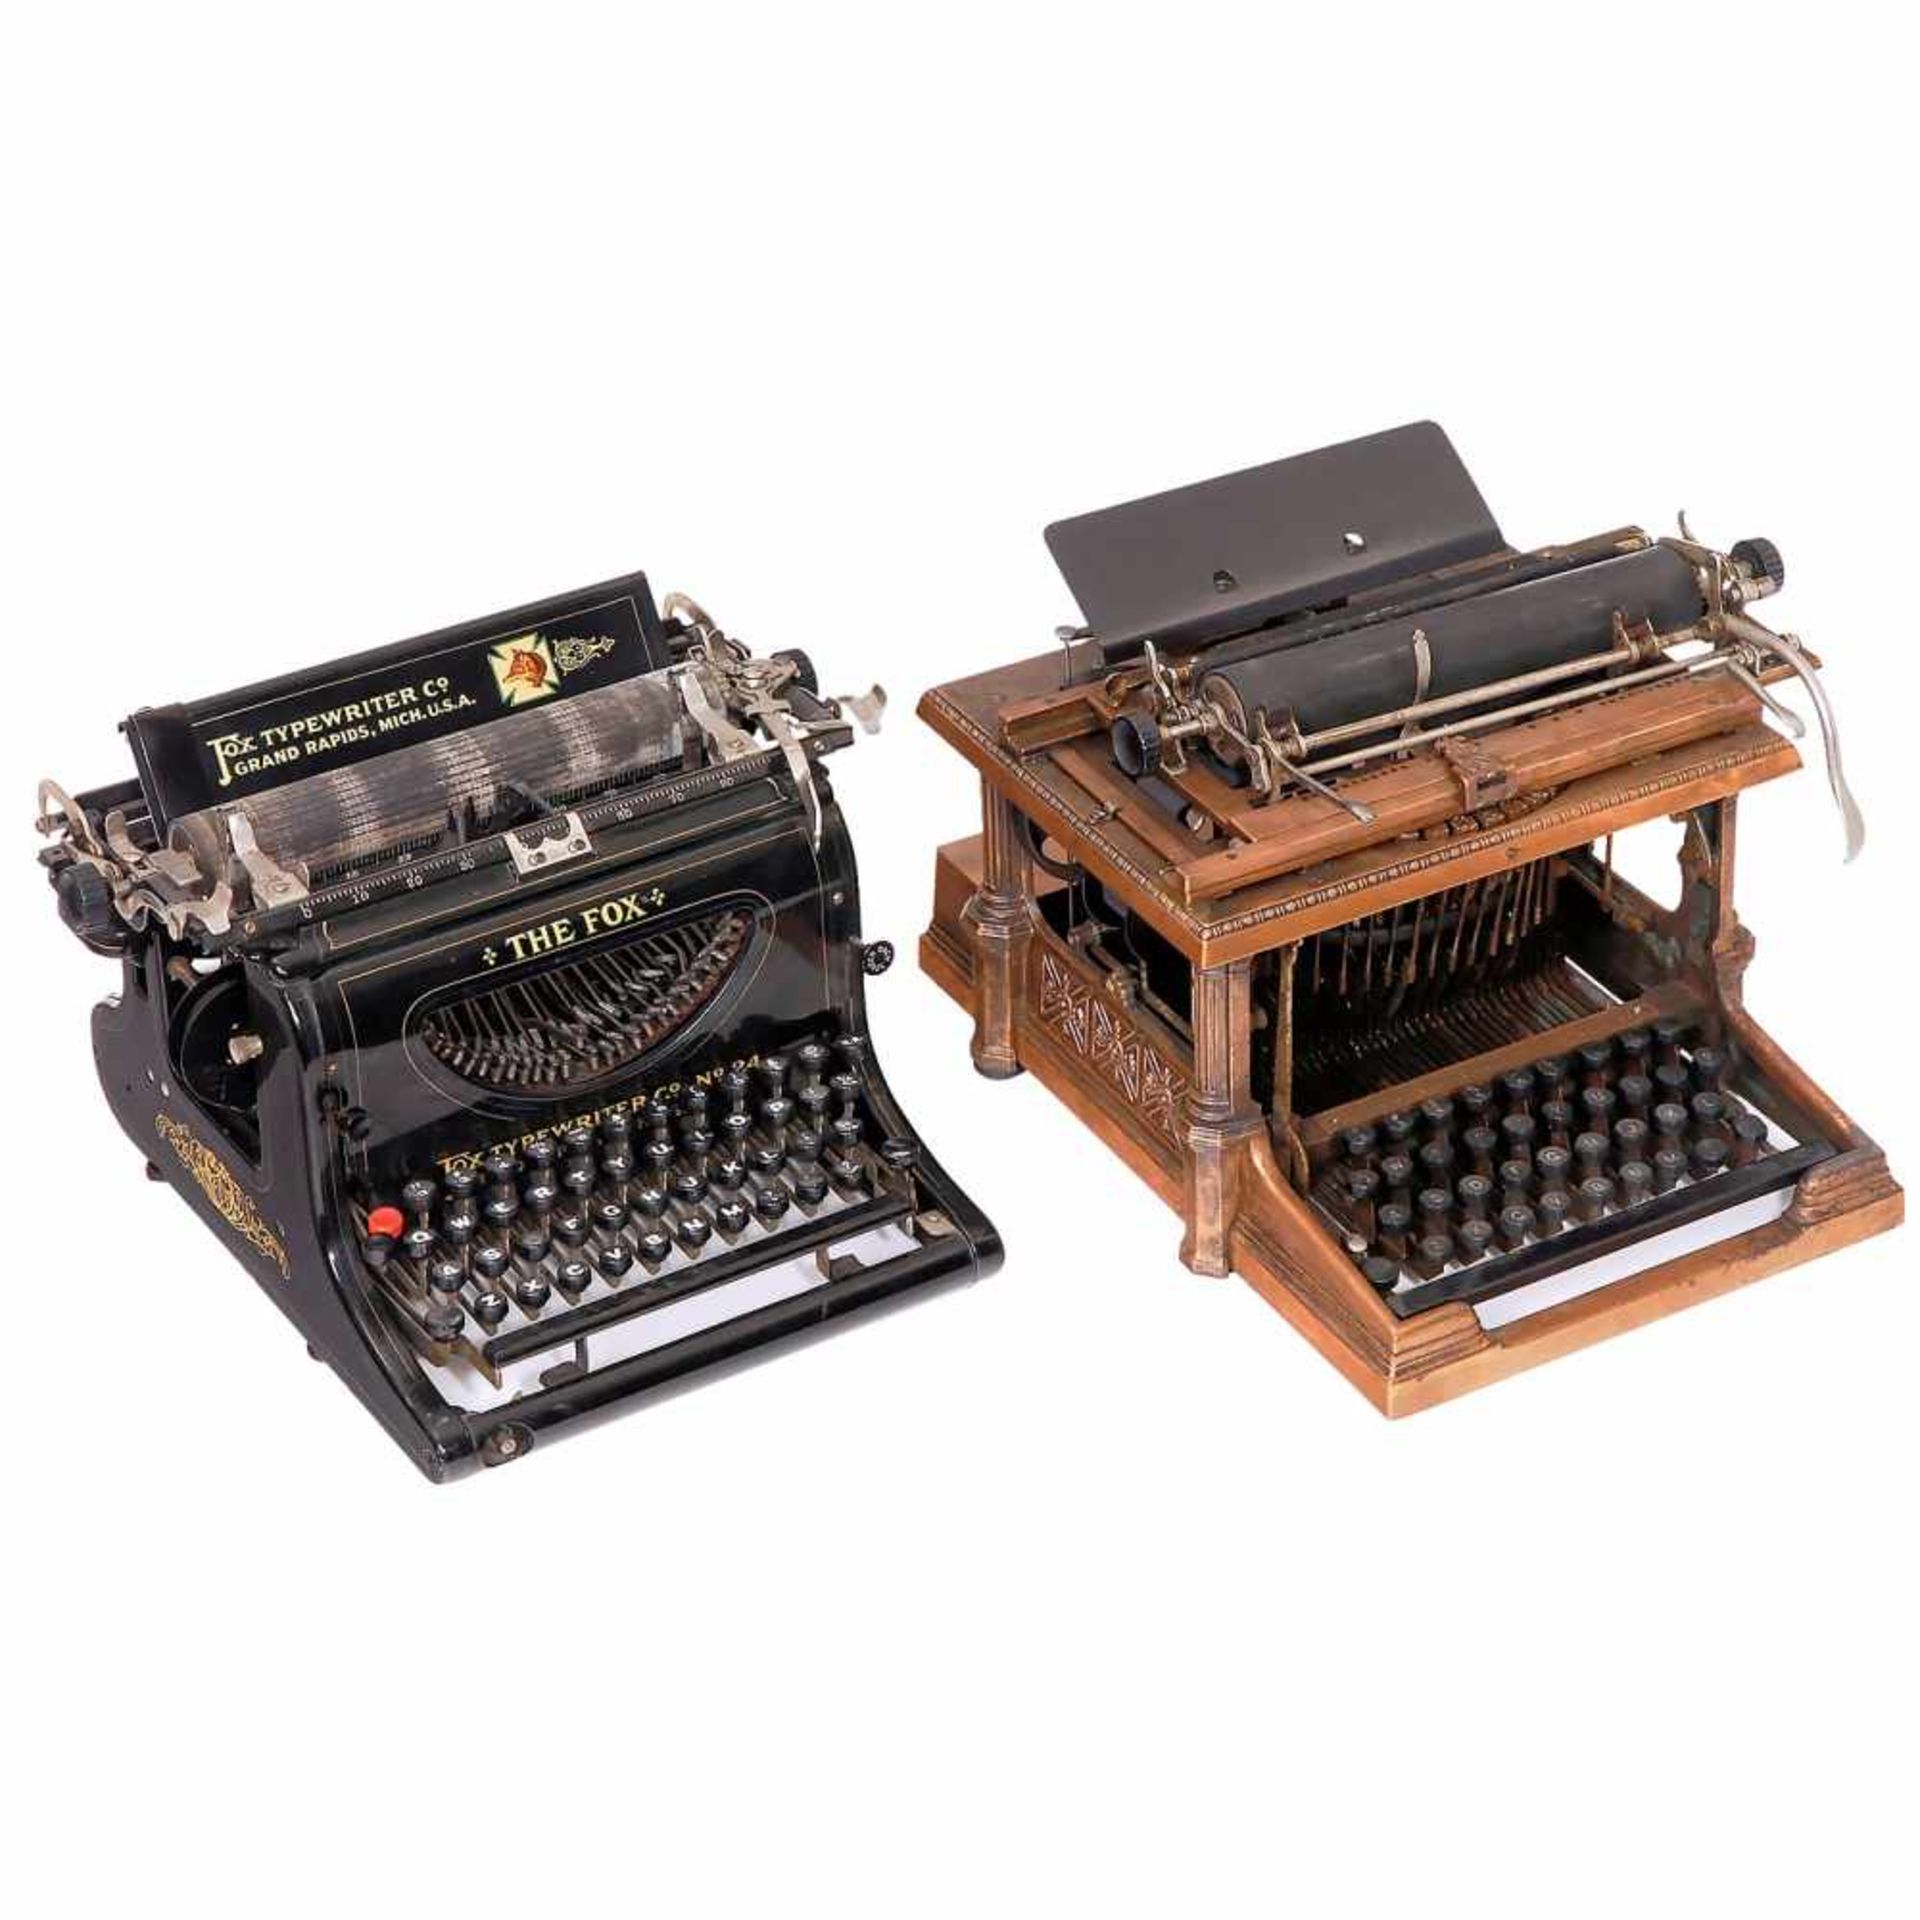 2 Early American Typewriters1) "Rem-Sho", 1896. Very interesting American upstroke machine with